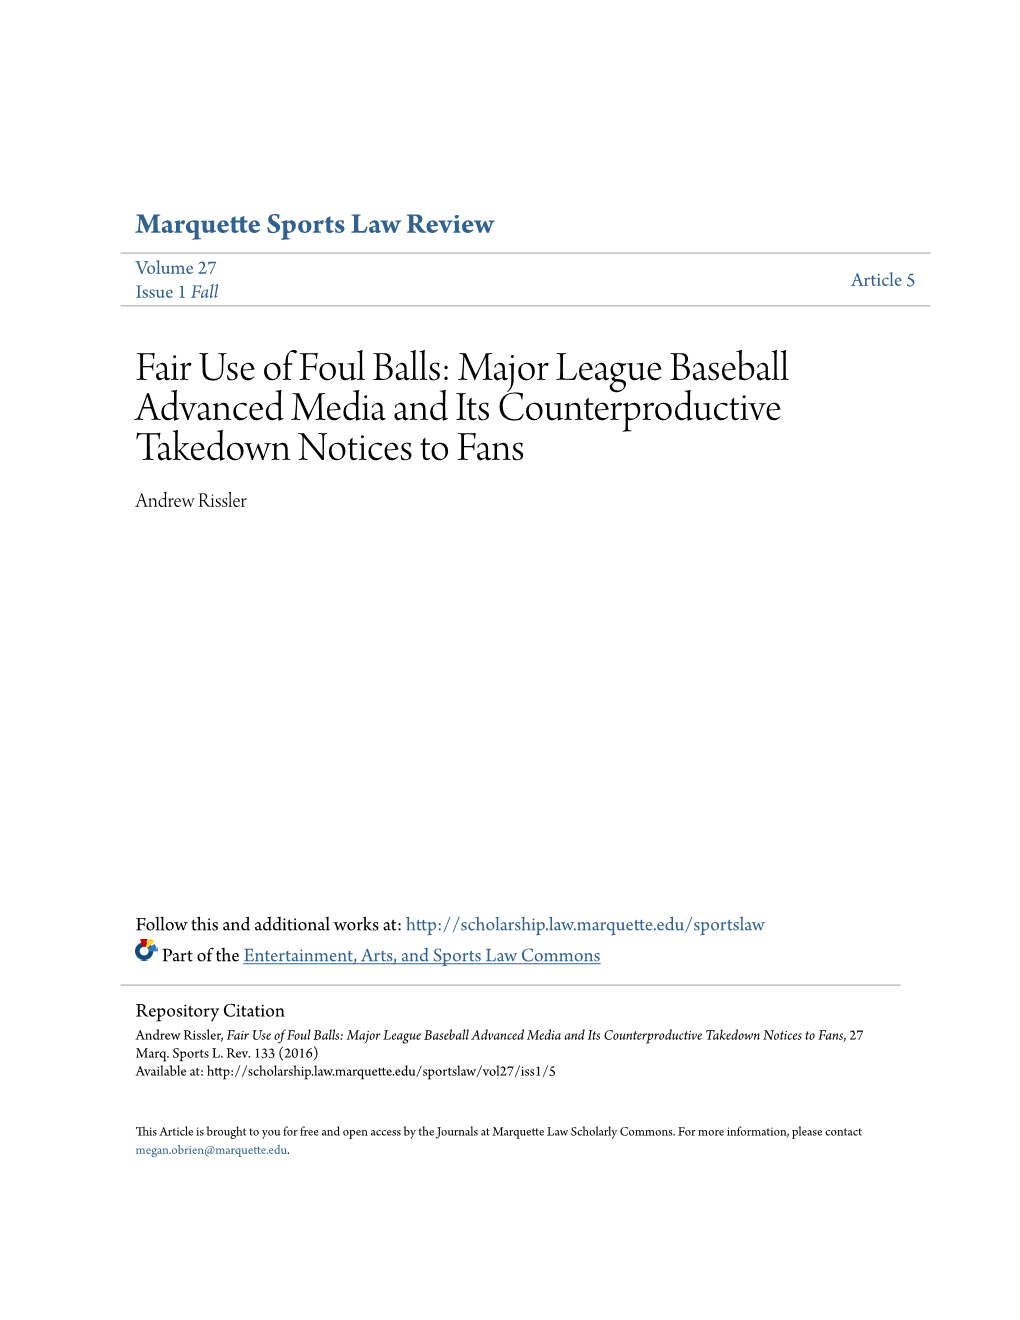 Fair Use of Foul Balls: Major League Baseball Advanced Media and Its Counterproductive Takedown Notices to Fans Andrew Rissler